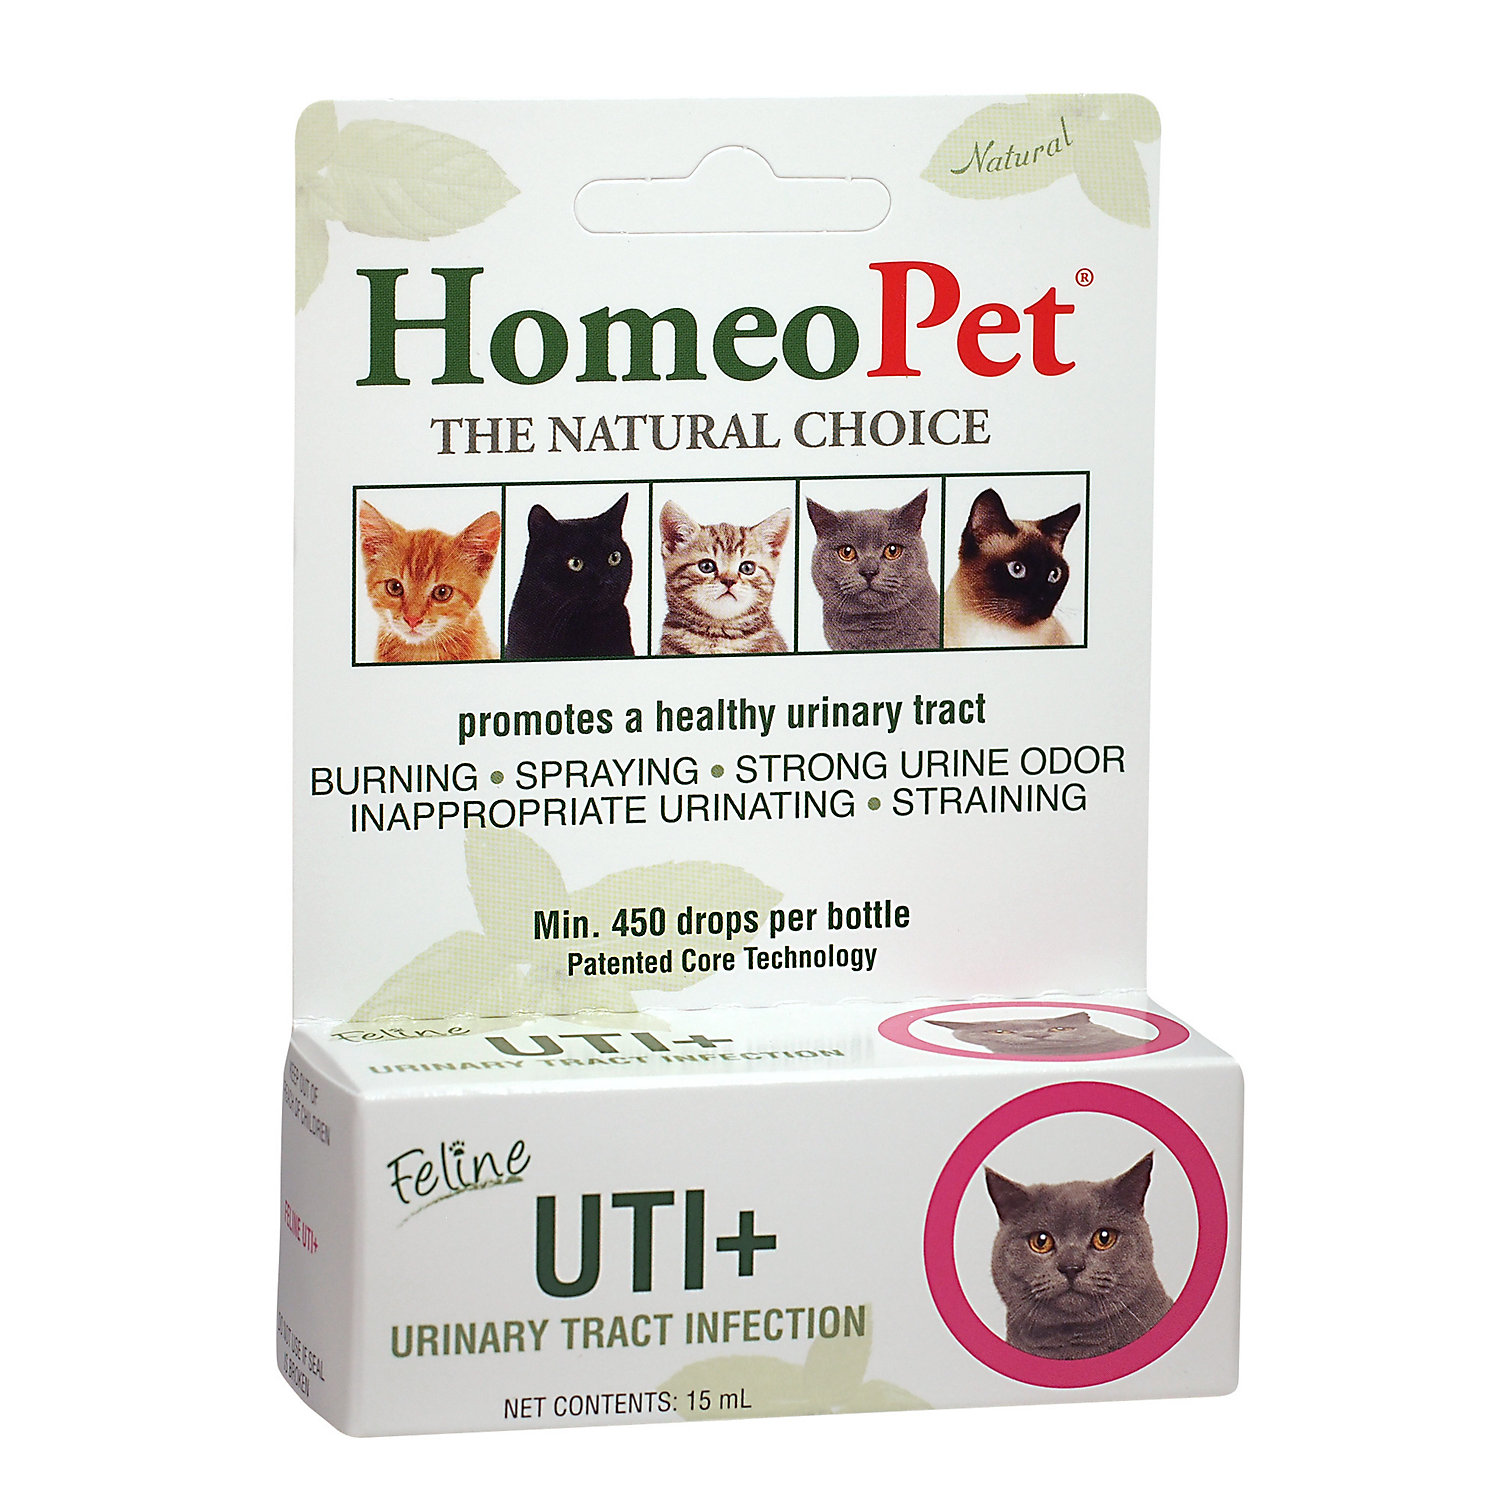 HomeoPet Feline Urinary Tract Infection Supplement